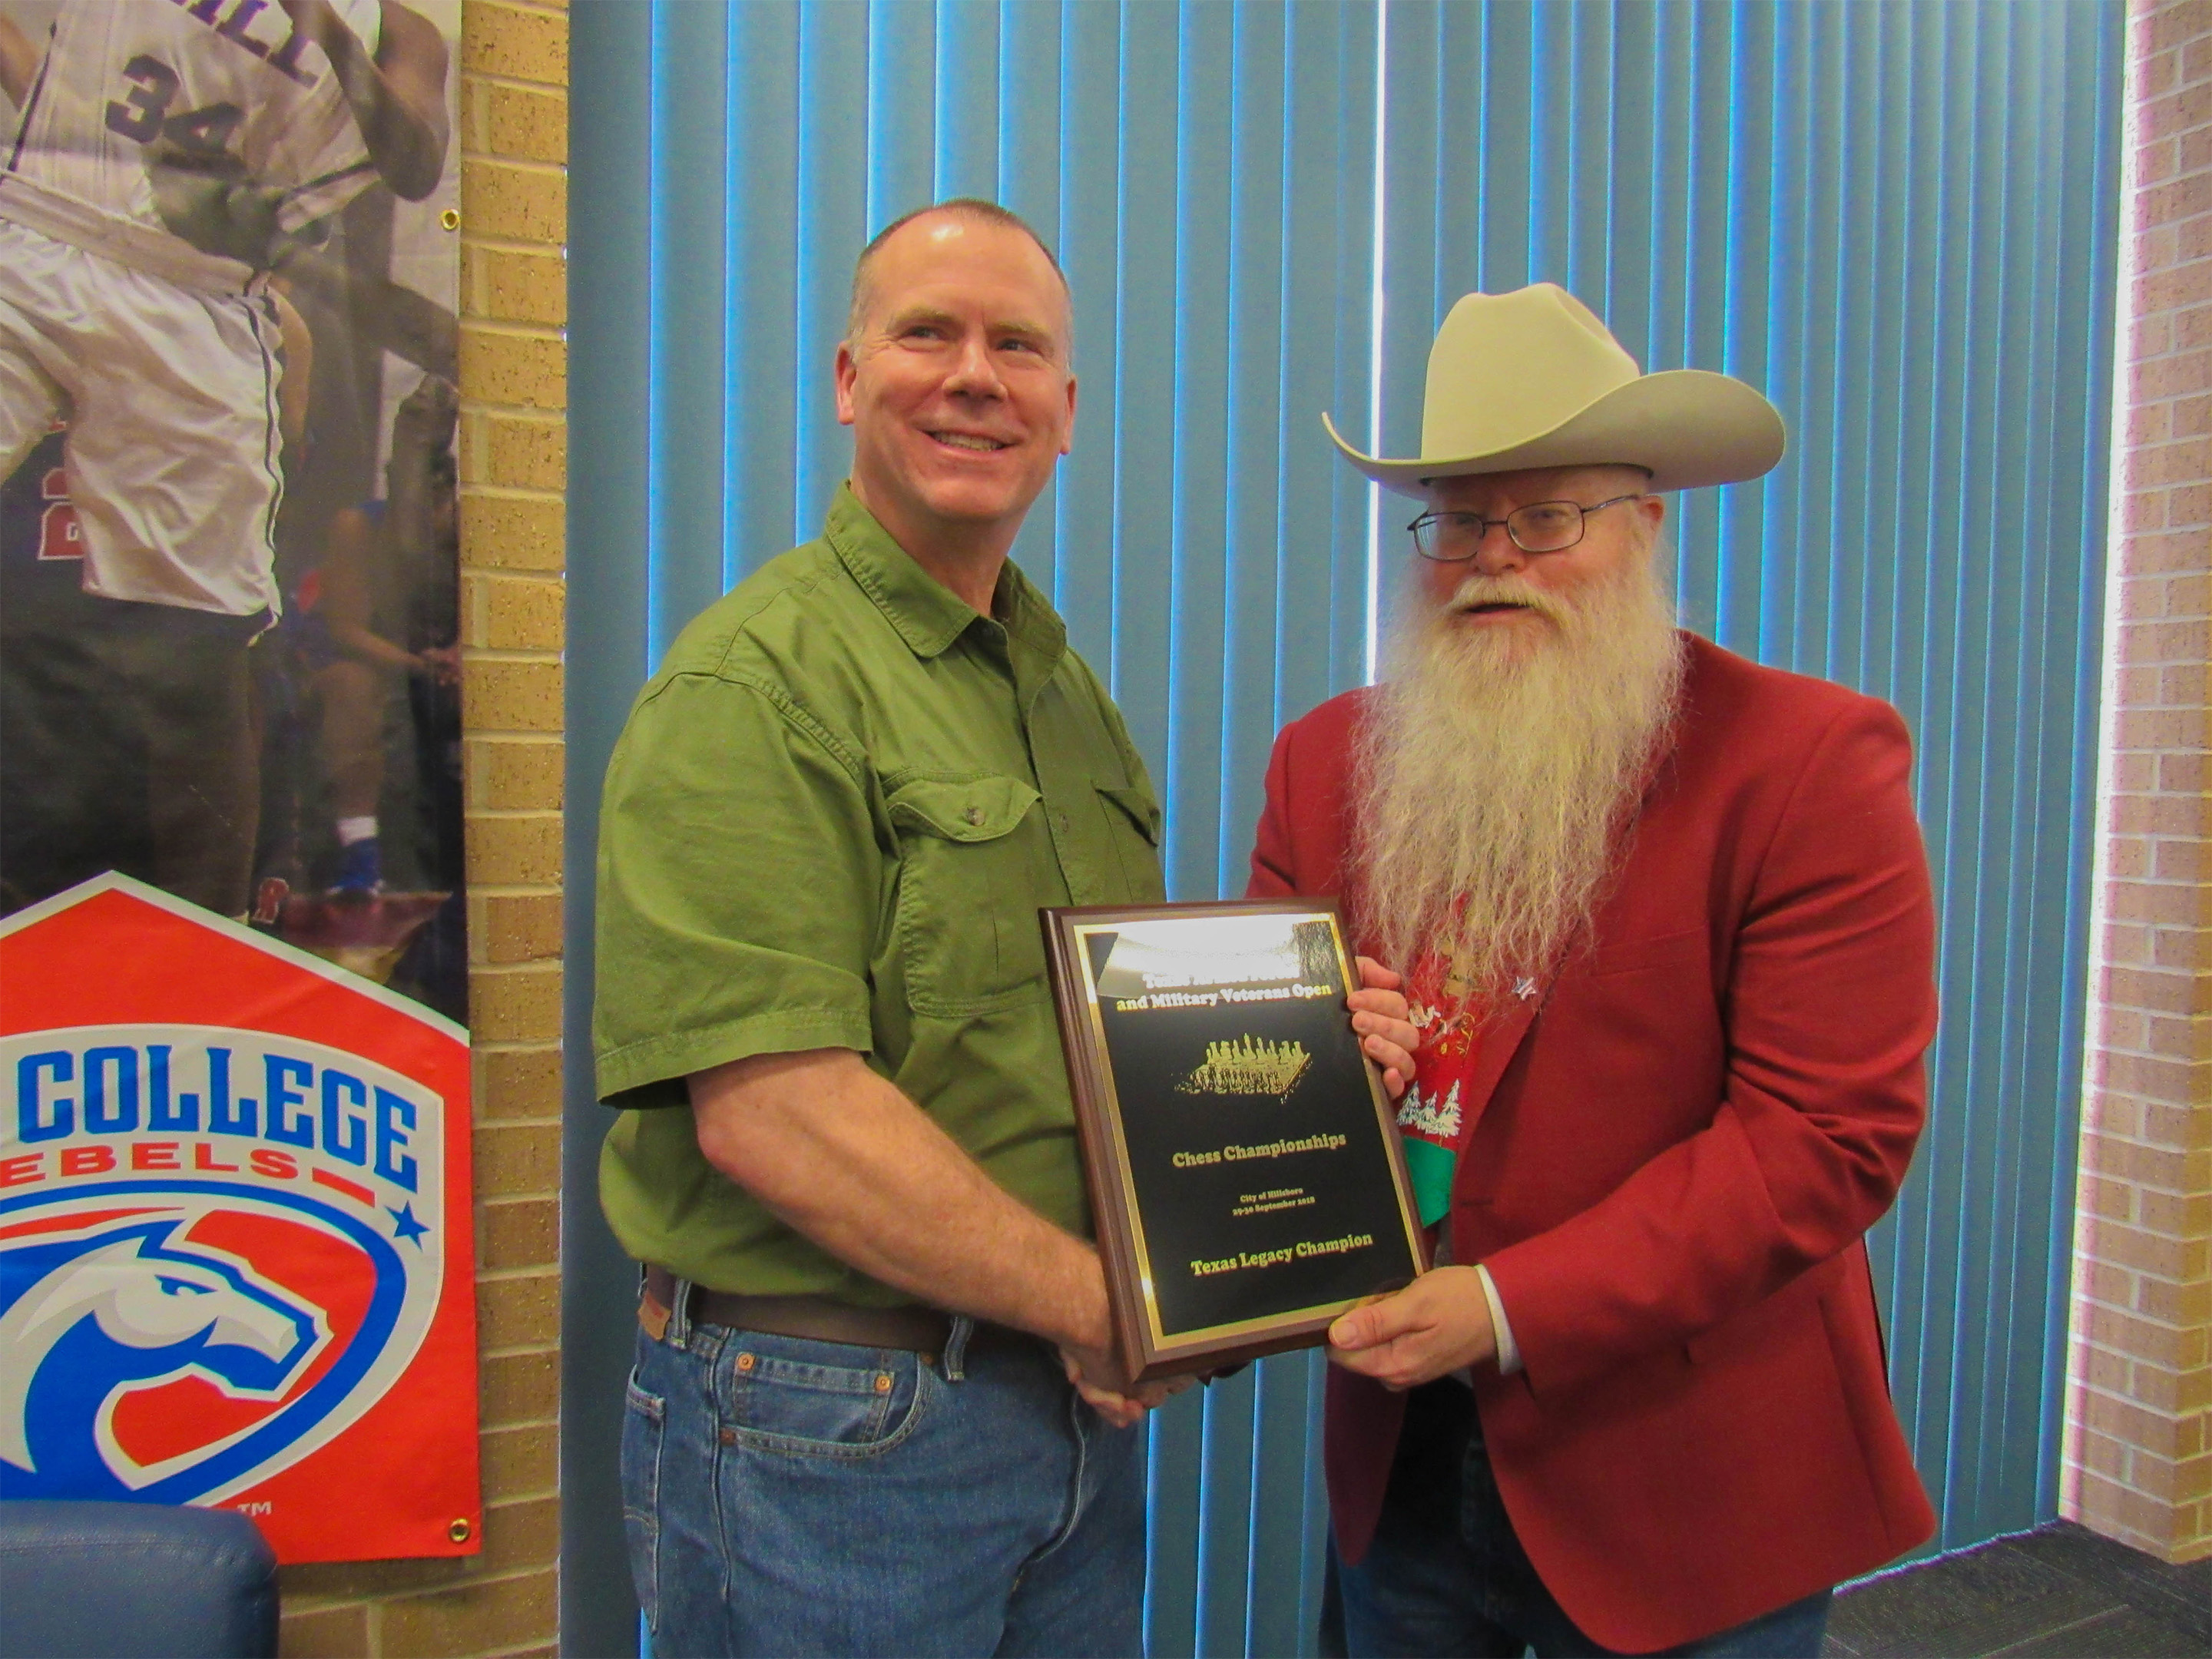 Army Veteran and Chess Expert Ron Farrar (left in the photo) is awarded the title of Texas Legacy Champion by Chief Organizer Jim Hollingsworth (right).  Photo by Sheryl McBroom.